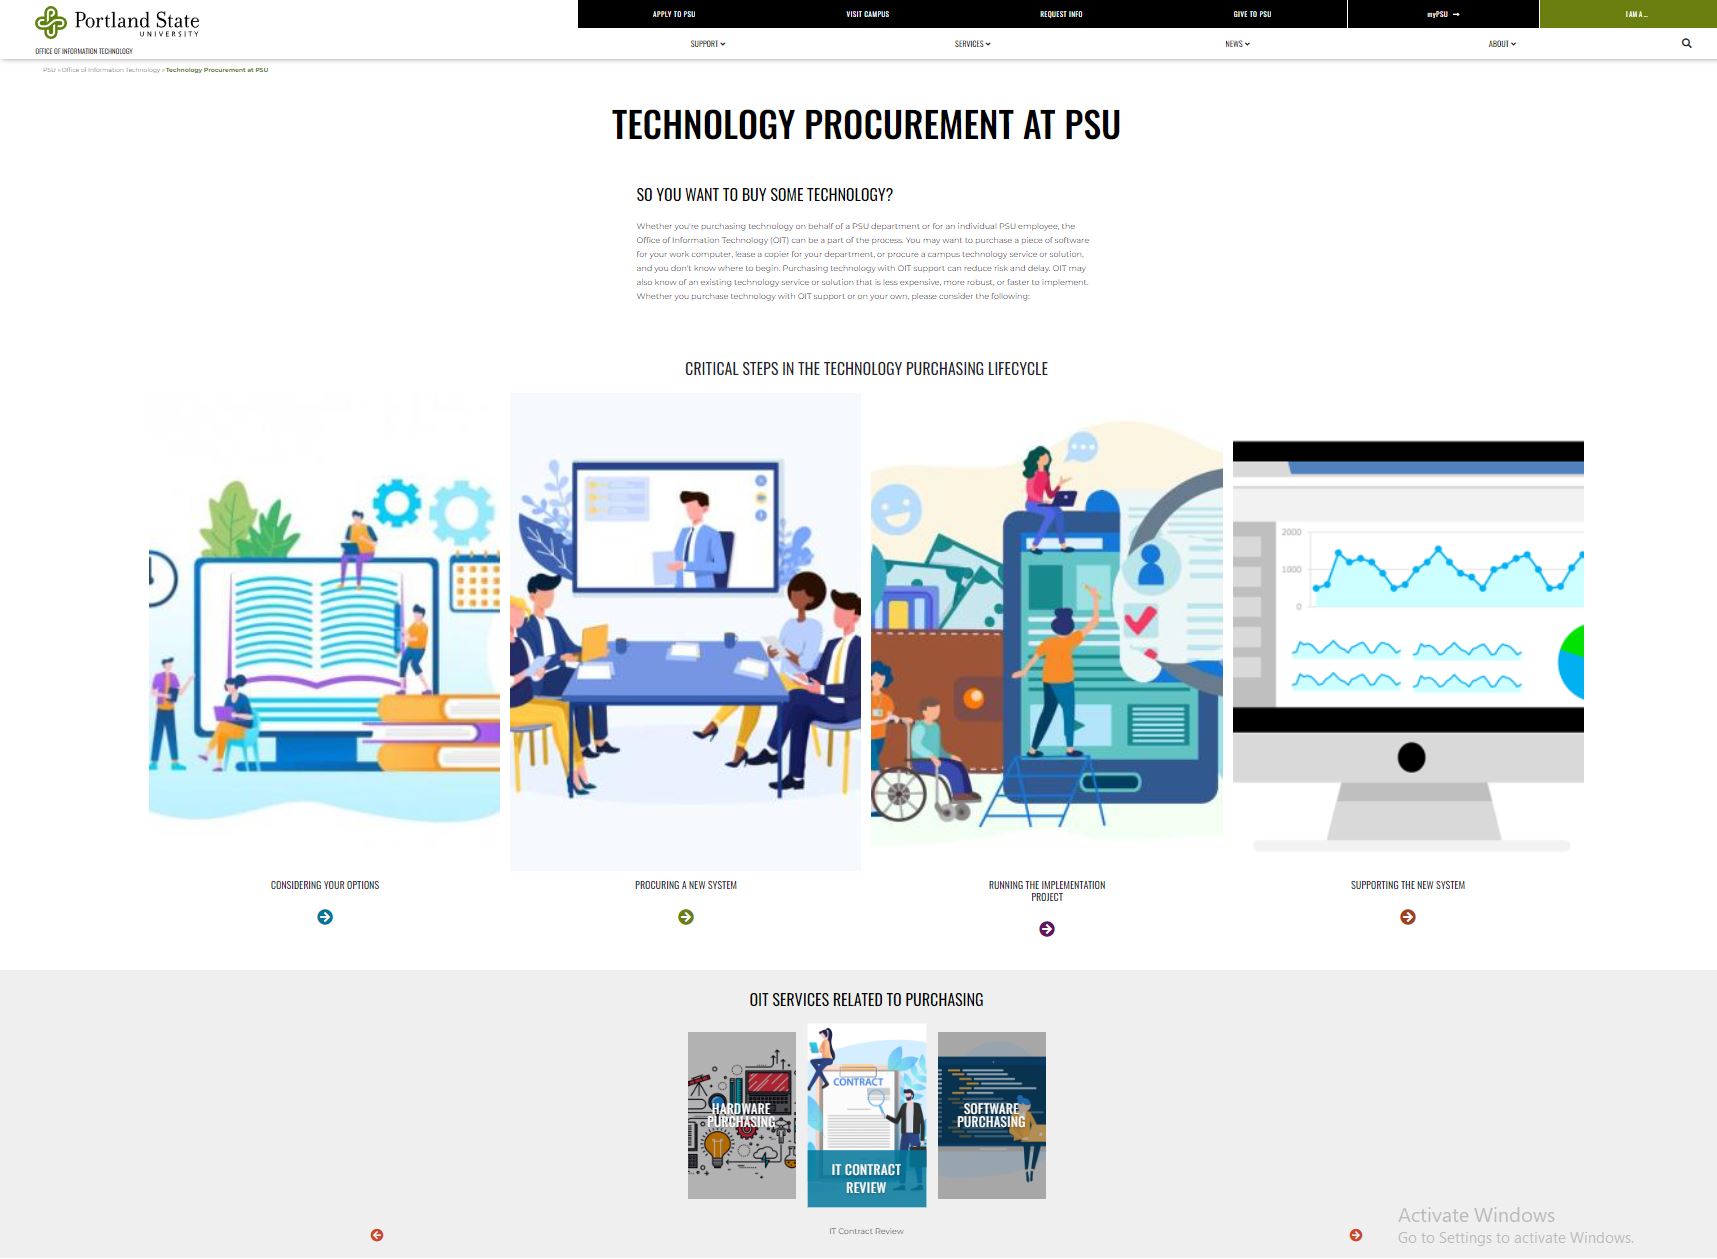 screenshot of the Technology Procurement at PSU website page